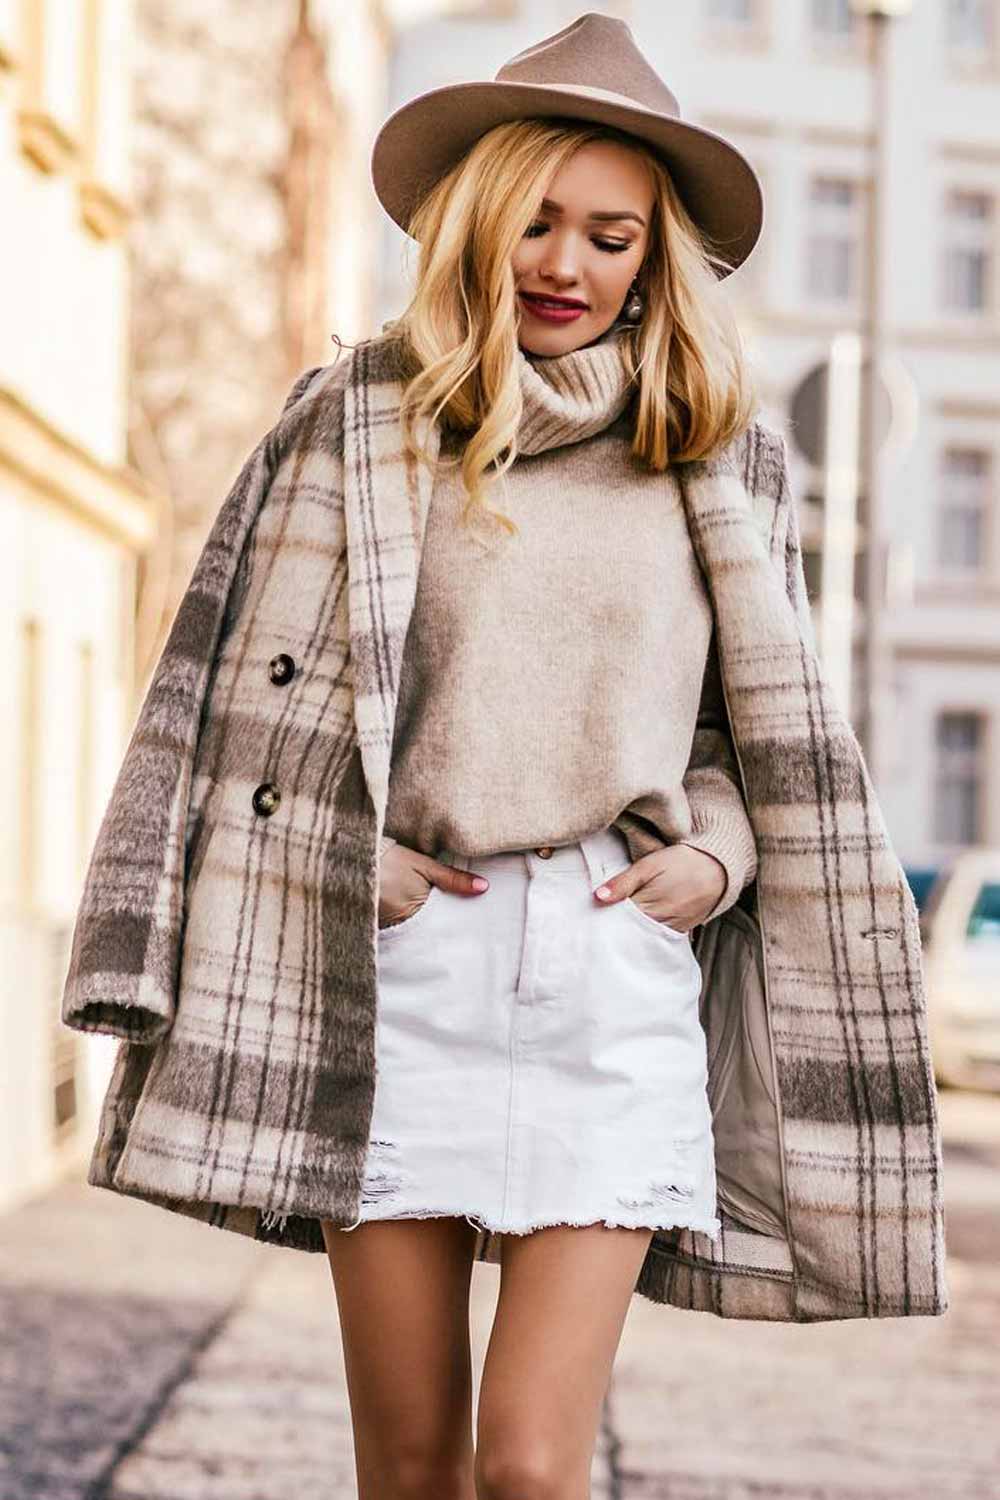 Winter Outfits With Fur Jackets